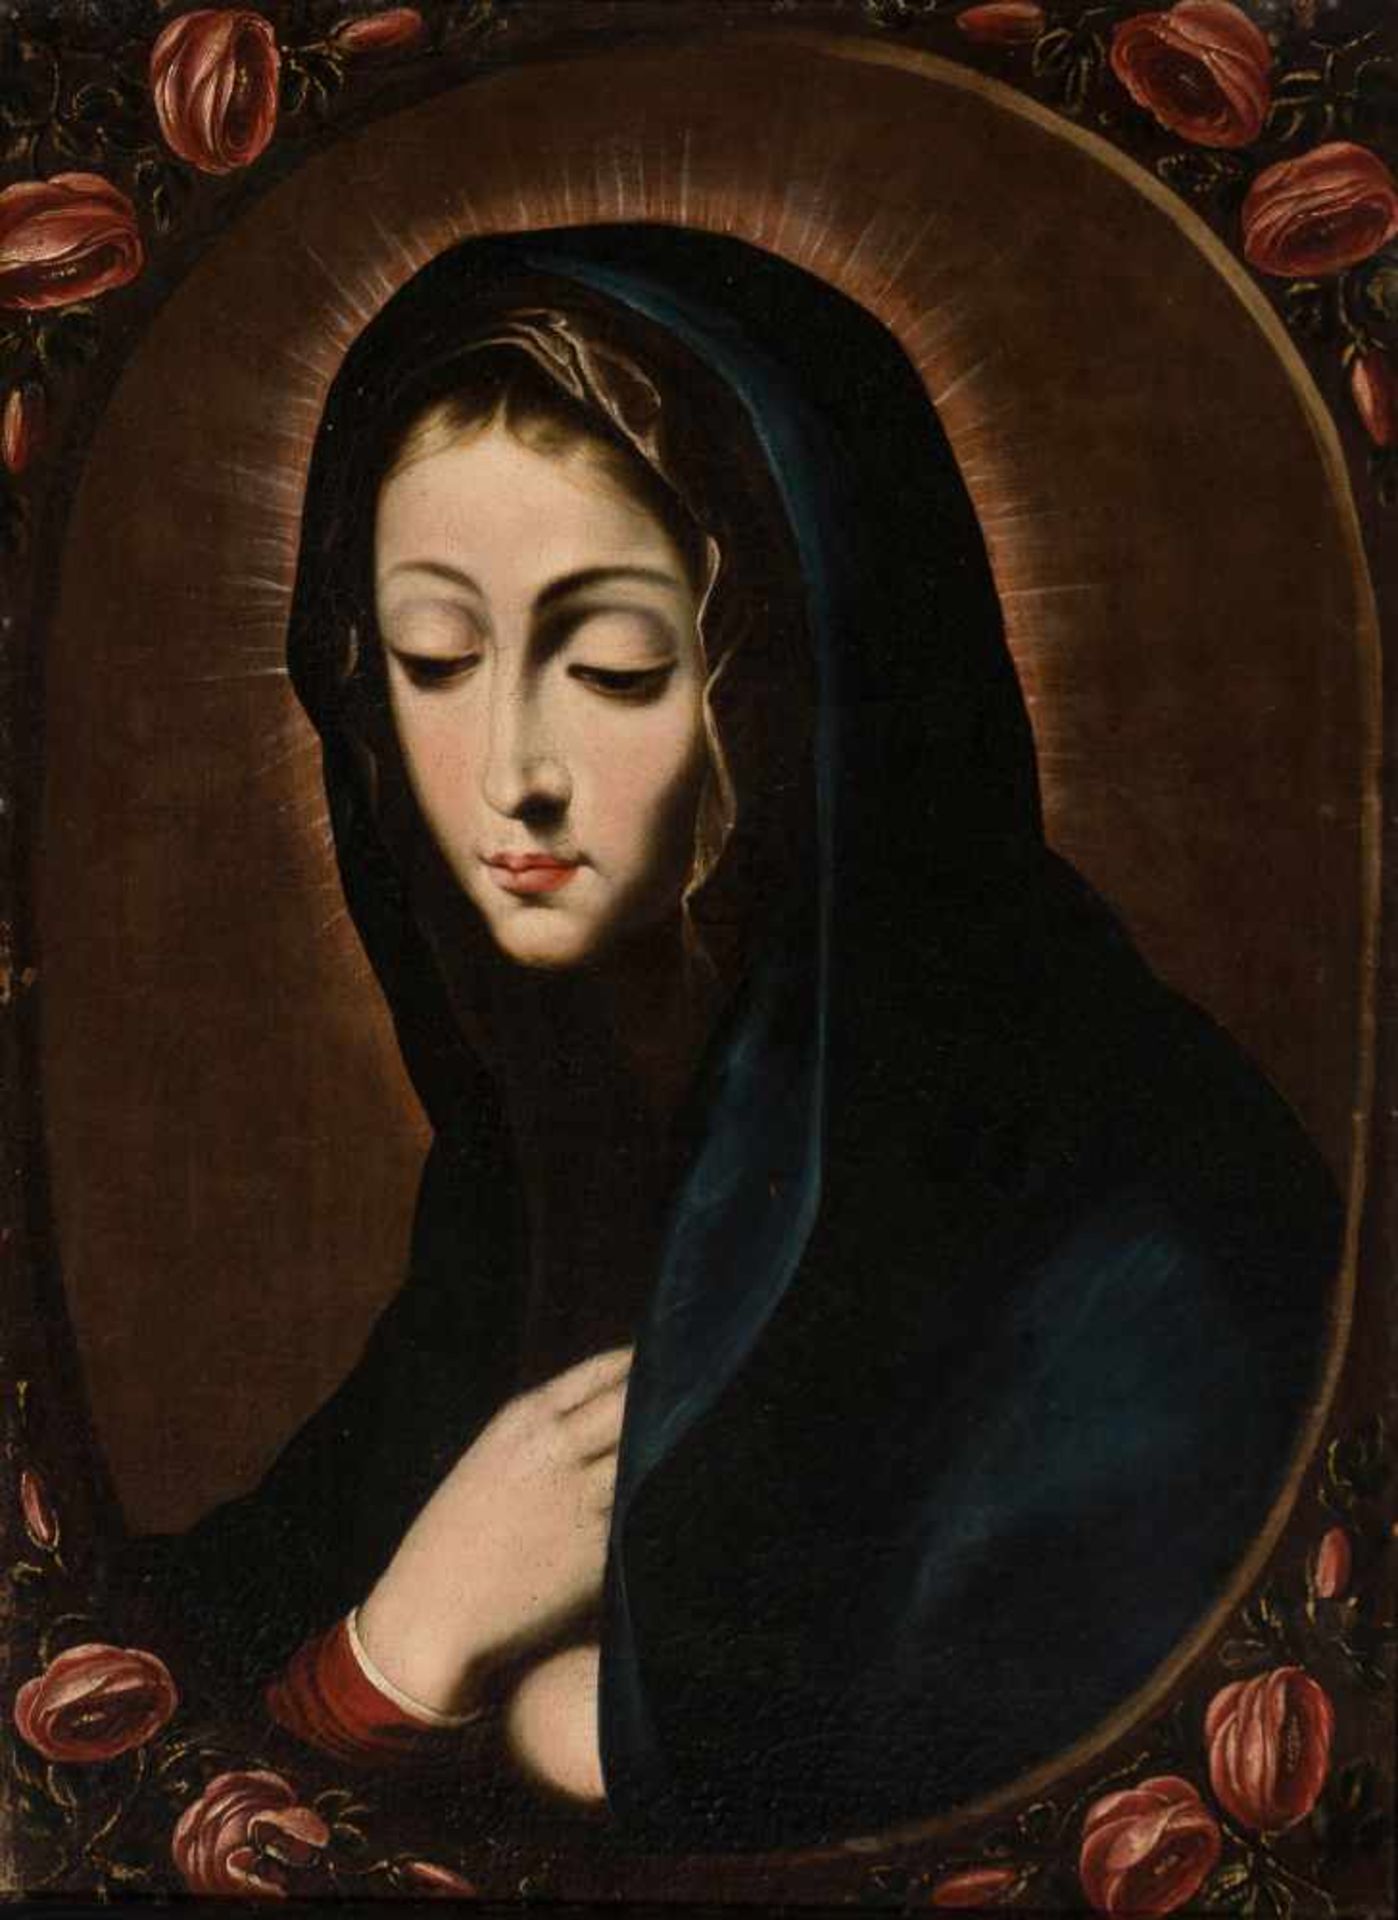 18th century Spanish School"Our Lady of Sorrows"Oil on canvas. 66.5 x 49.5 cm.- - -22.00 % buyer's